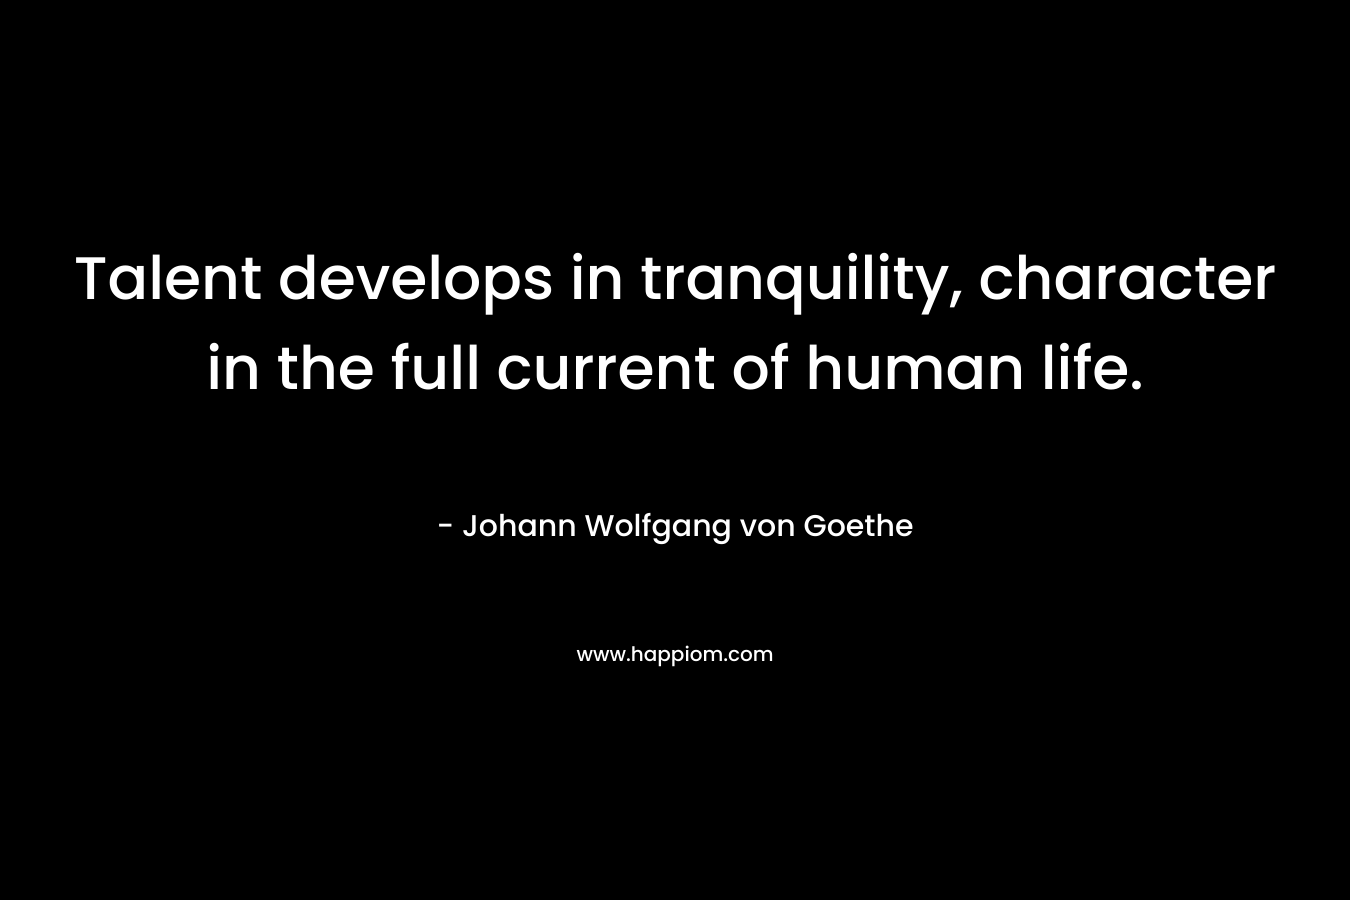 Talent develops in tranquility, character in the full current of human life.